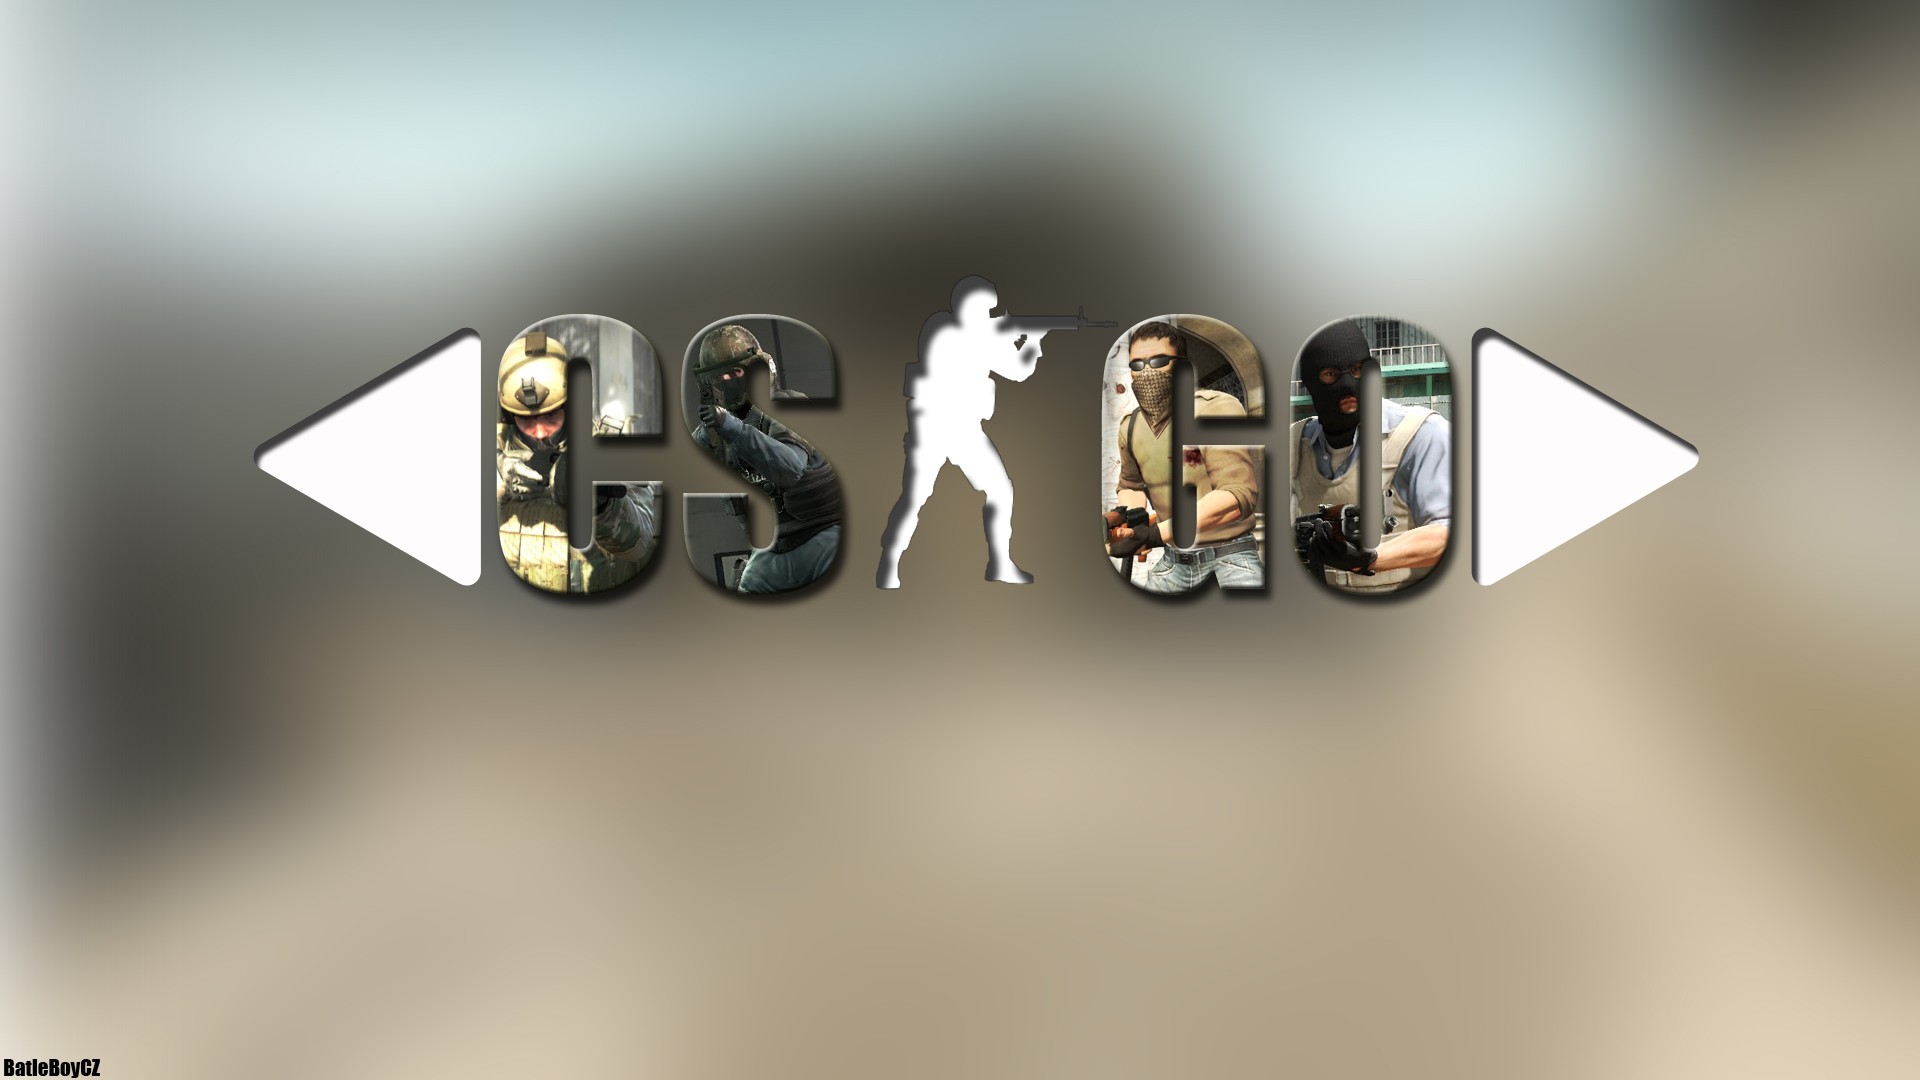 Counter Strike: Global Offensive, Video Games Wallpaper